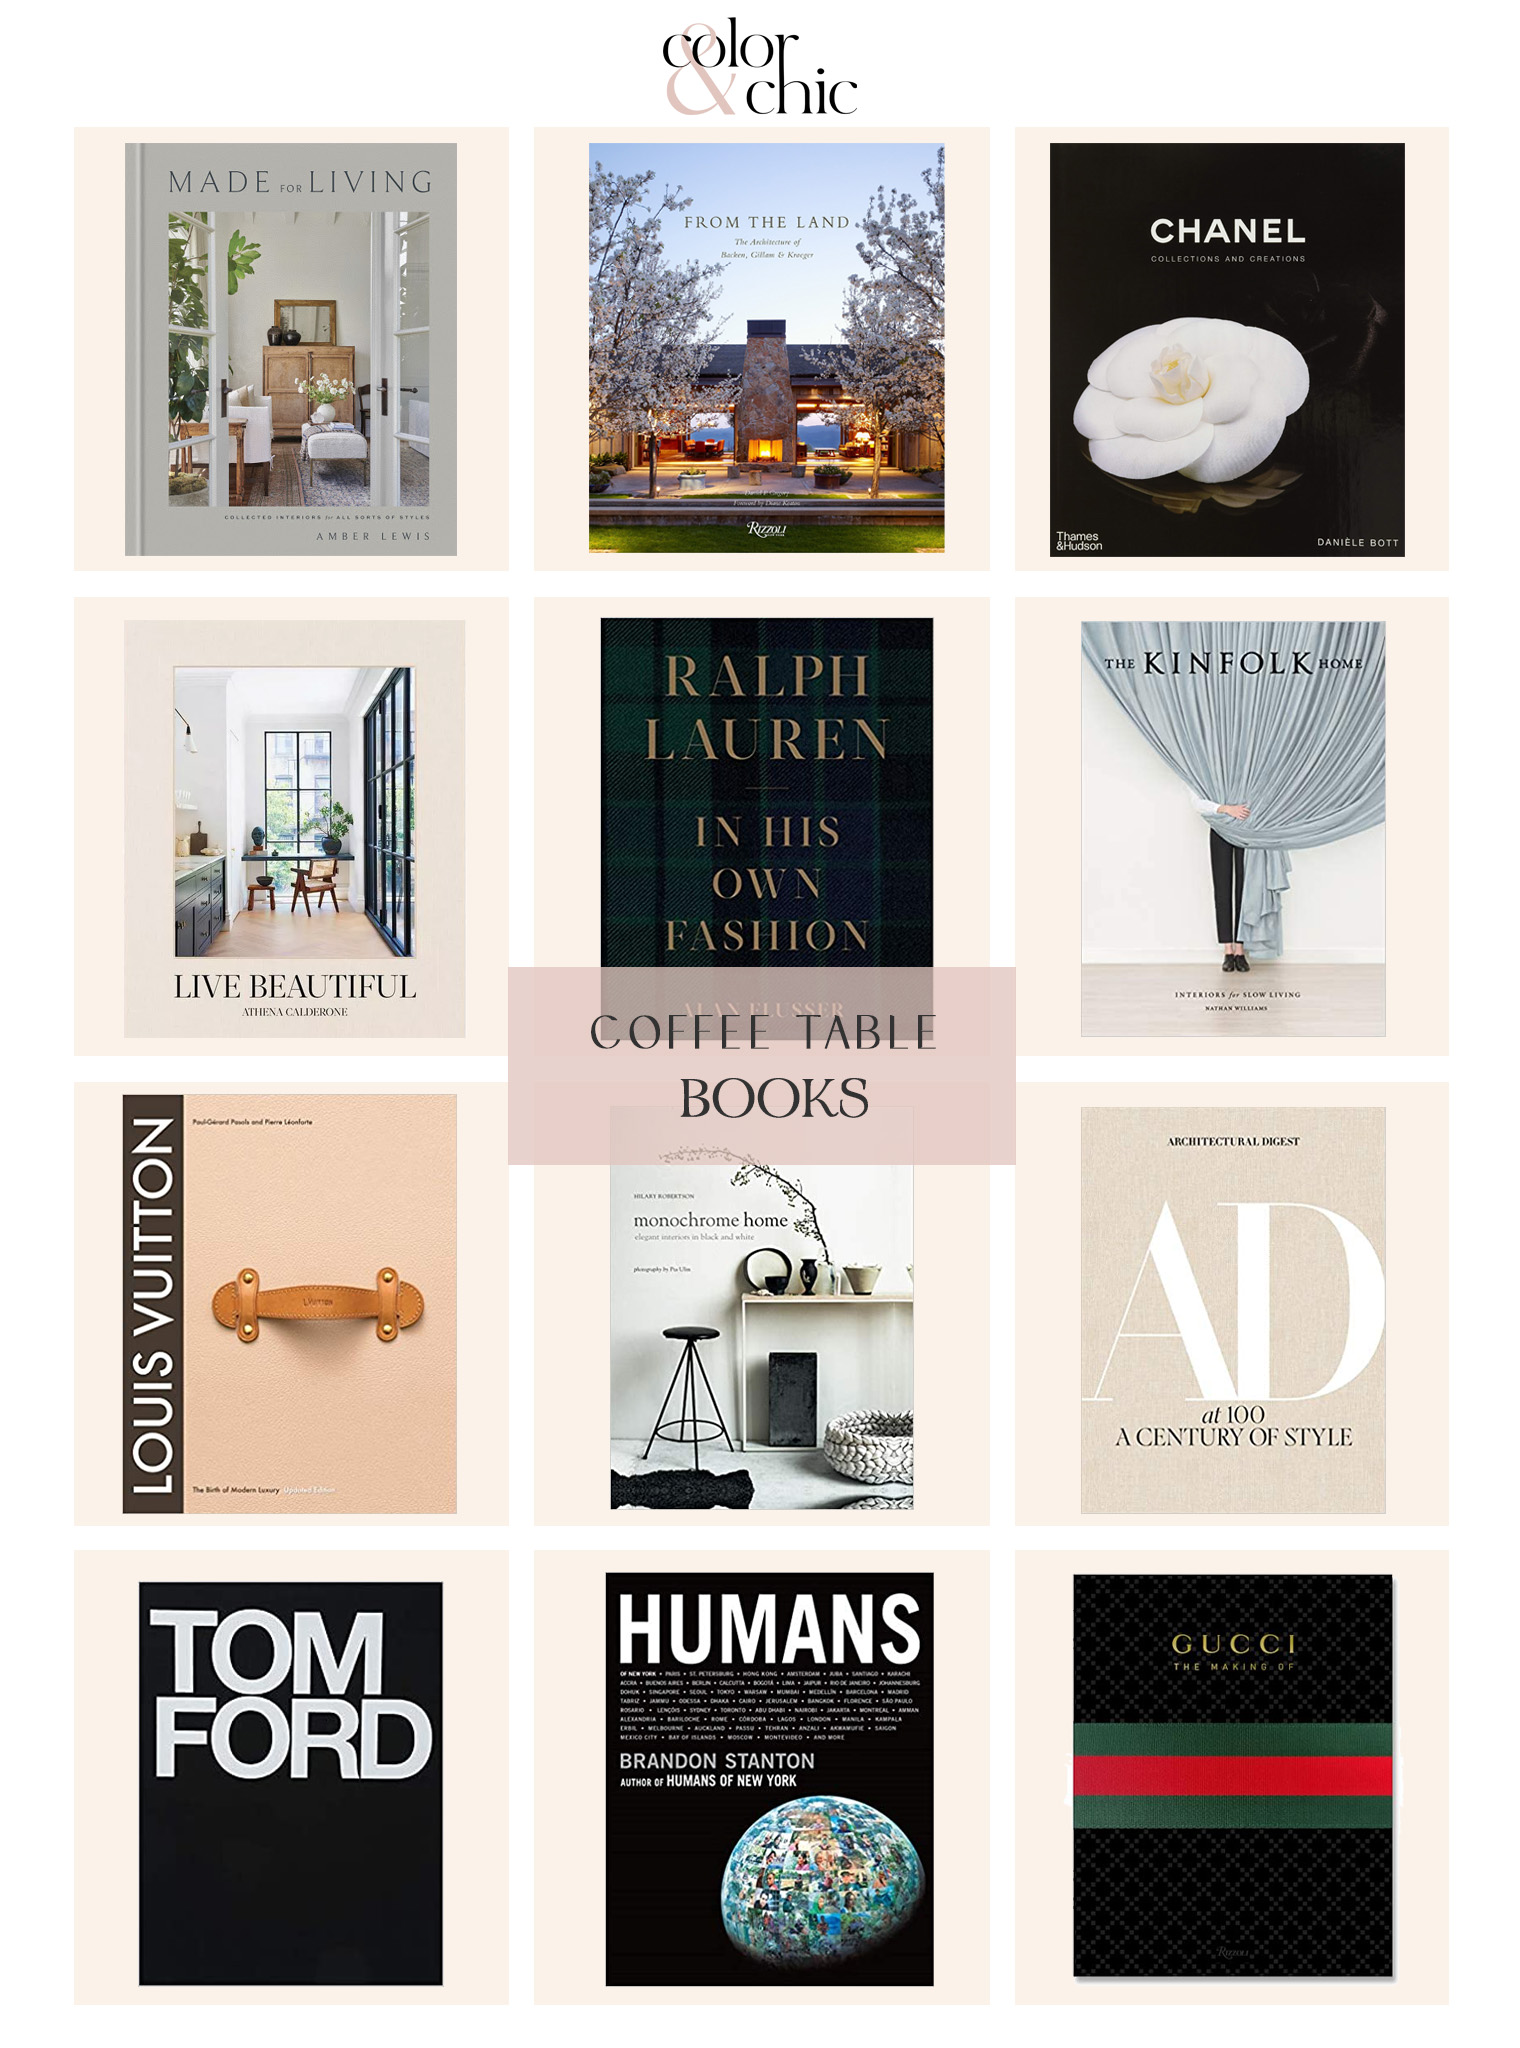 Best Coffee Table Books For Decorating, Architectural Digest Best Coffee Table Books